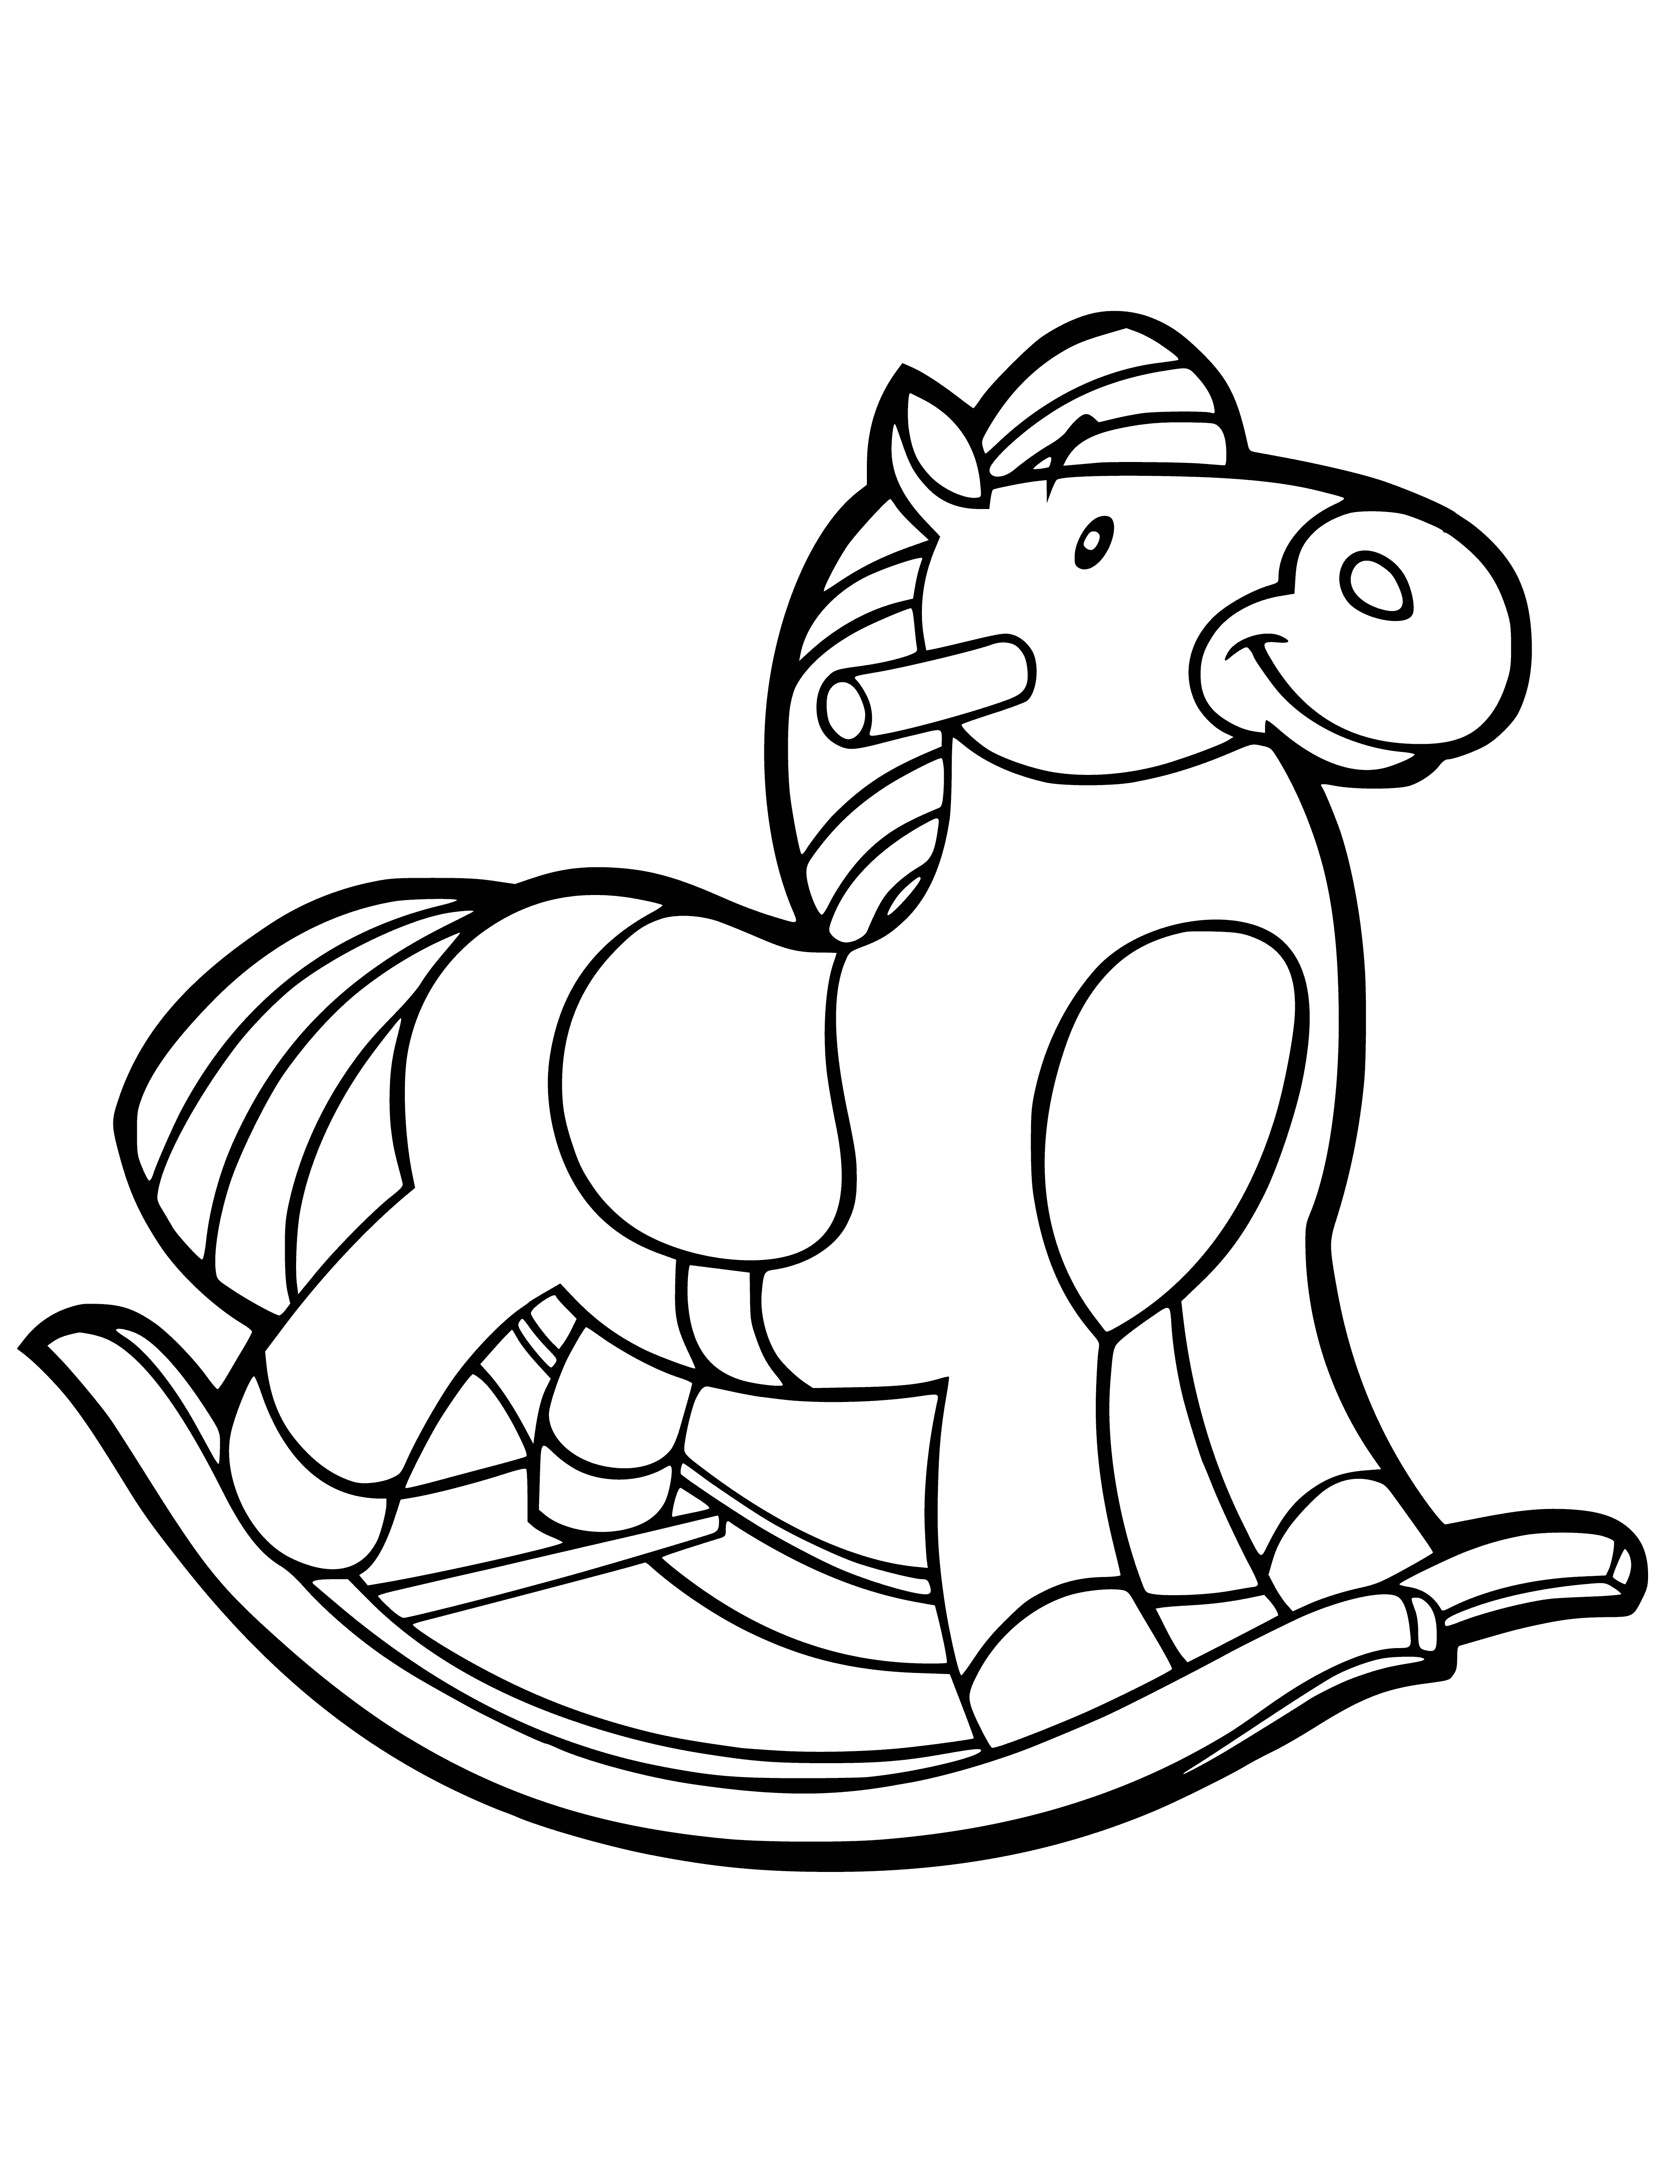 coloring page: A smiling rocking horse with purple mane, yellow saddle, & stars around it.